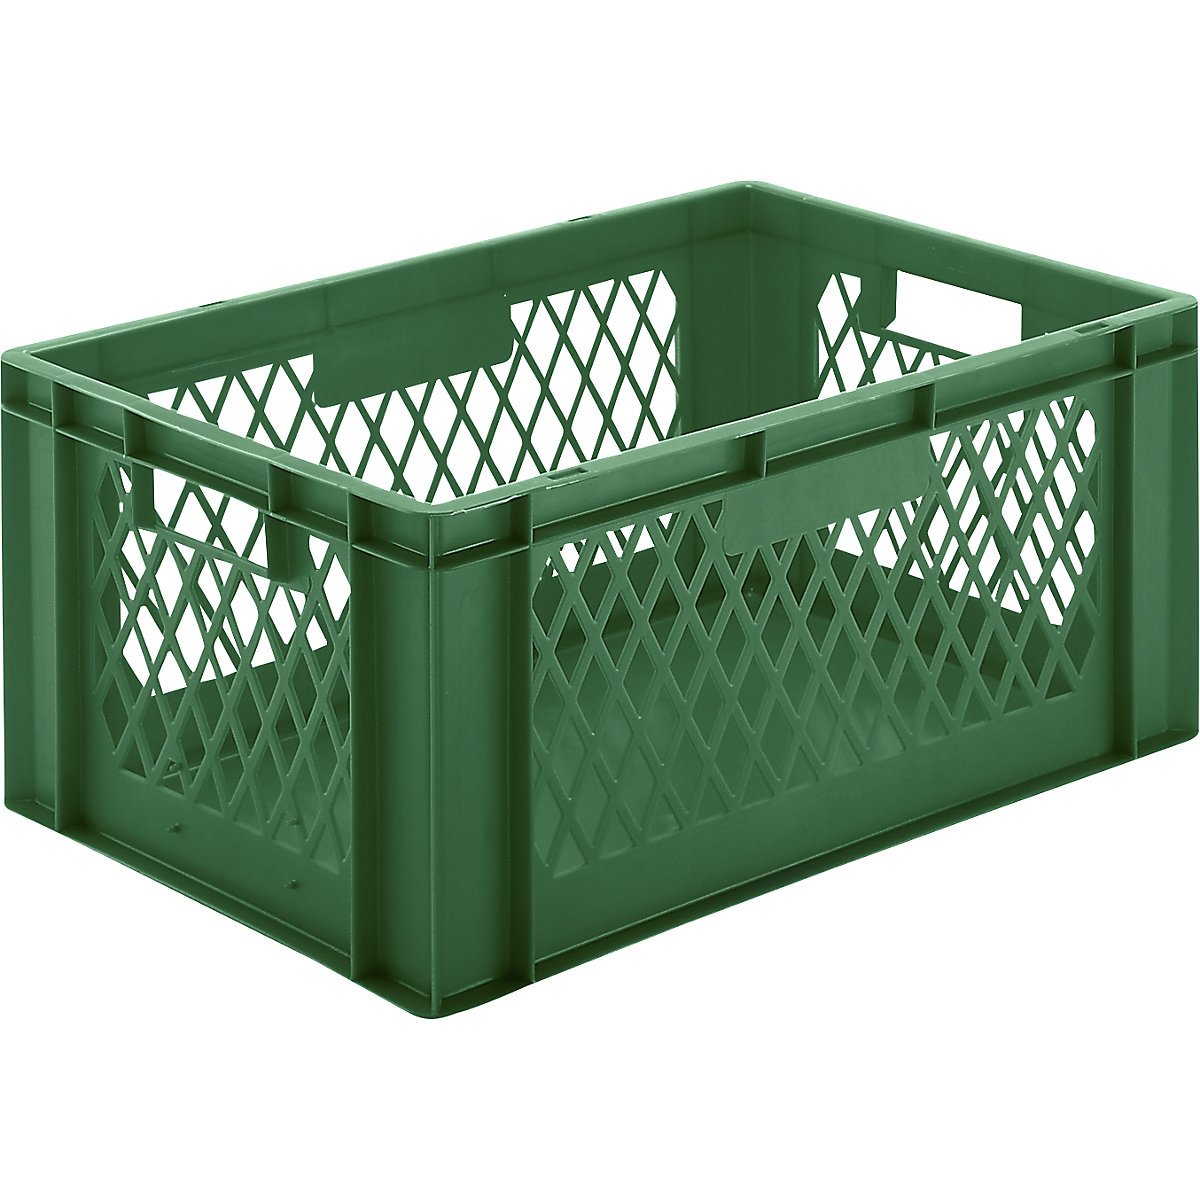 Euro stacking container, perforated walls, closed base, LxWxH 600 x 400 x 270 mm, green, pack of 5-5